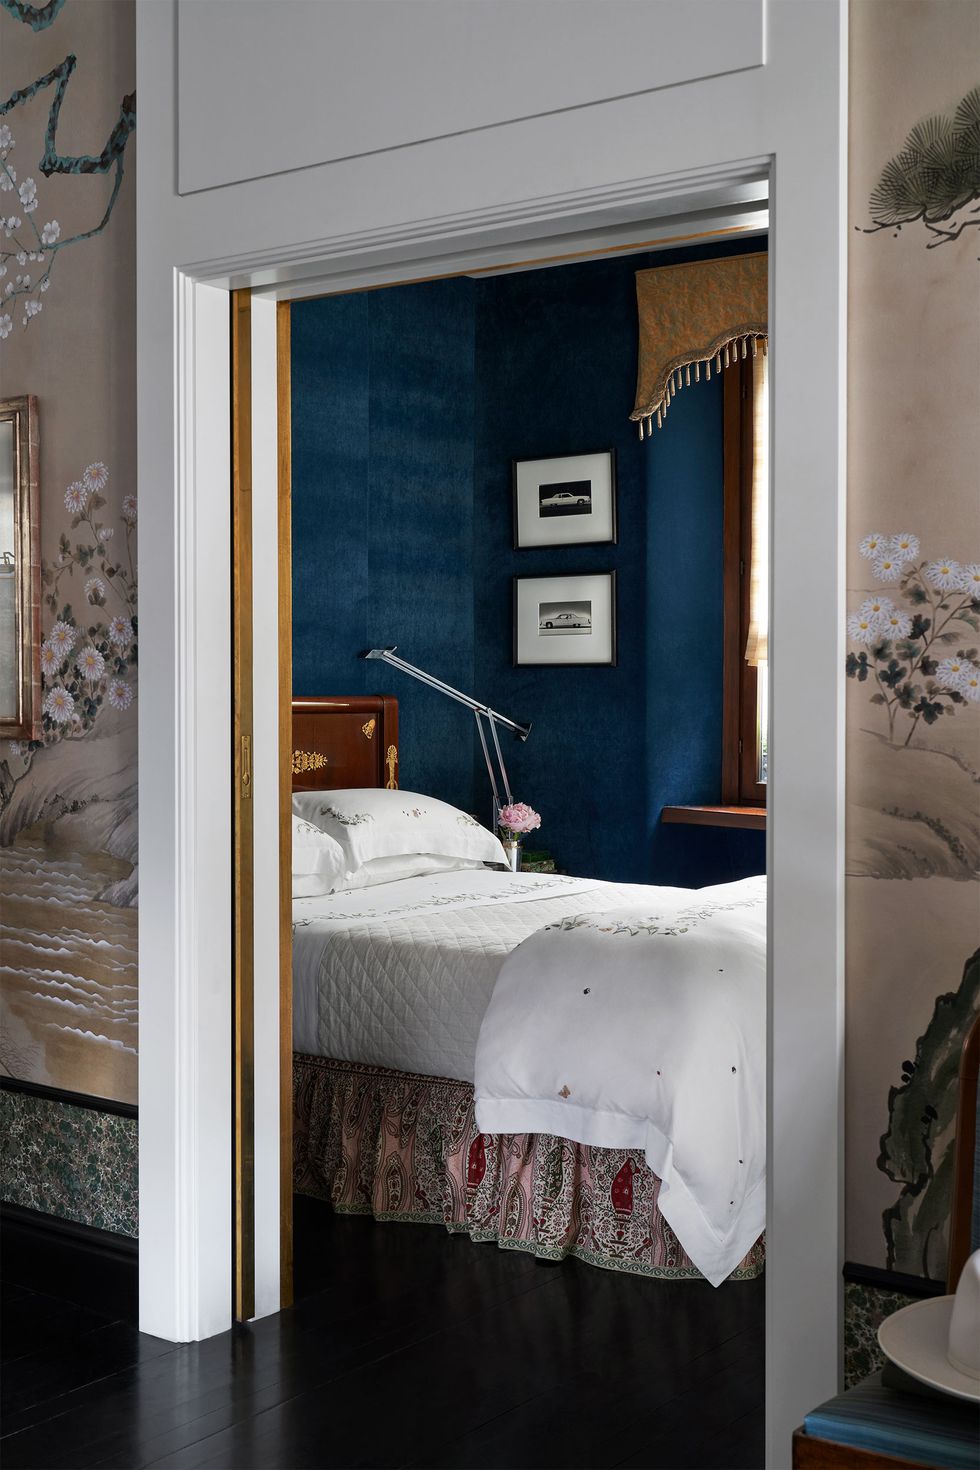 a bedroom, seen from a hallway, has deep blue velvet walls, a window valance with short tassels, two small framed artworks, a bed with a wood headboard, white linens, and printed bedskirt, floor lamp beside bed